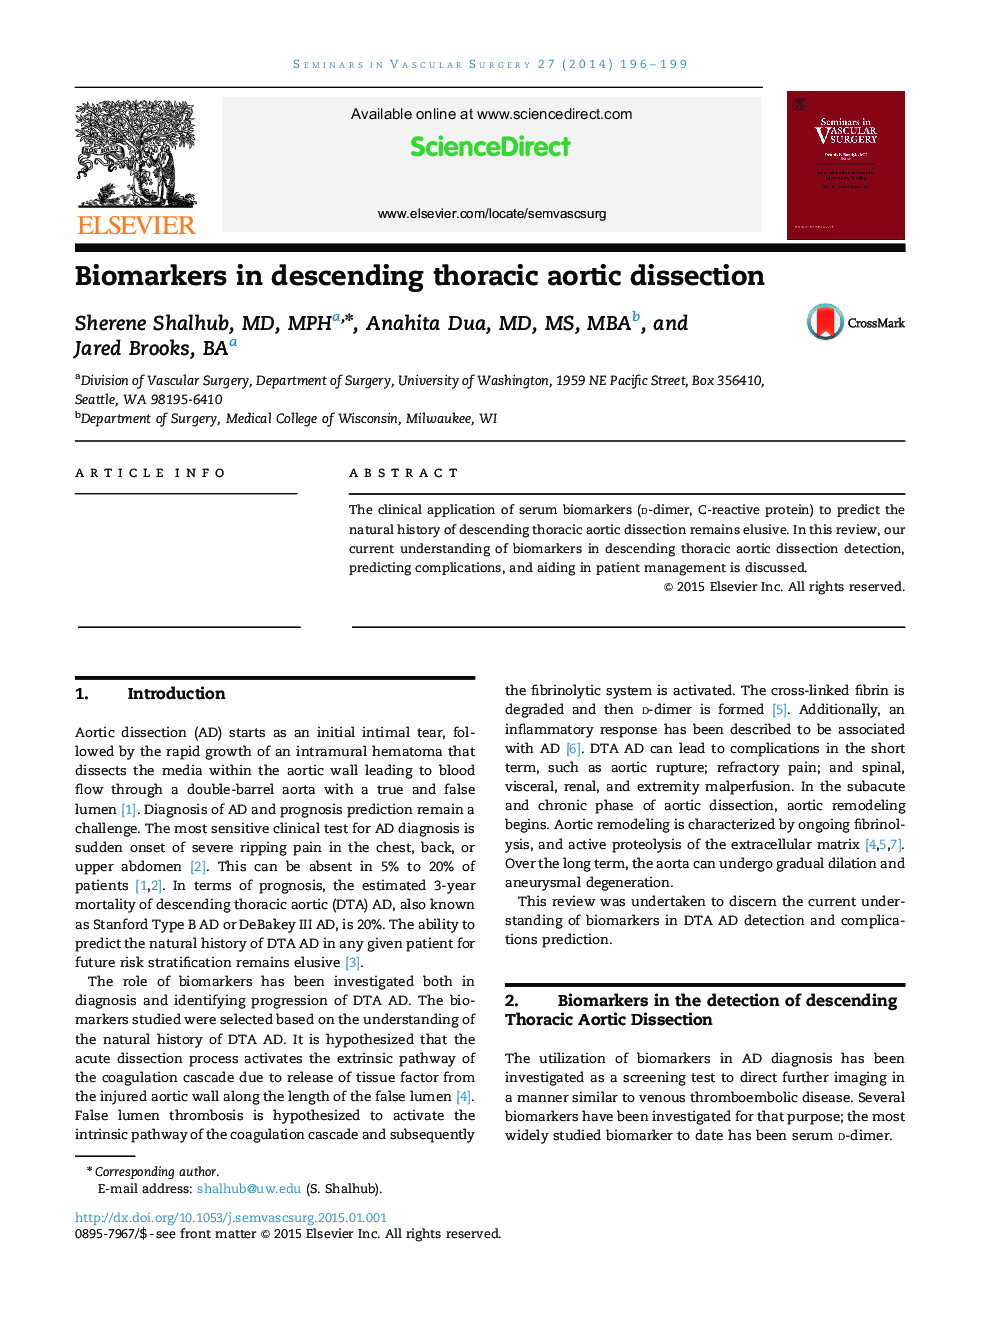 Biomarkers in descending thoracic aortic dissection